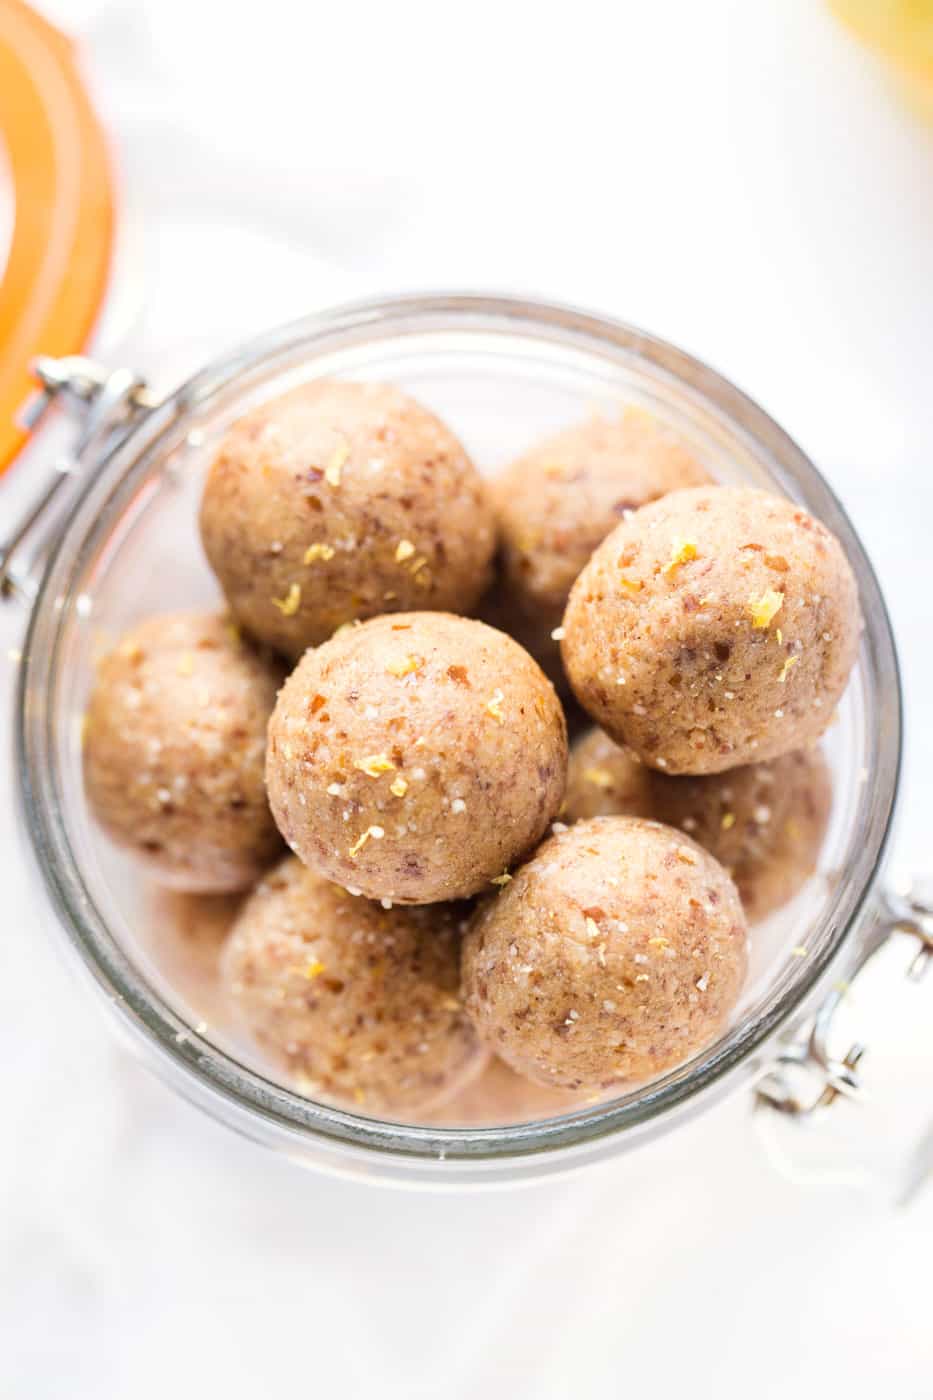 These NO BAKE Lemon Protein Balls are the perfect healthy snack to take on the go. Packed with protein, healthy fats and carbs to fuel you all day long!